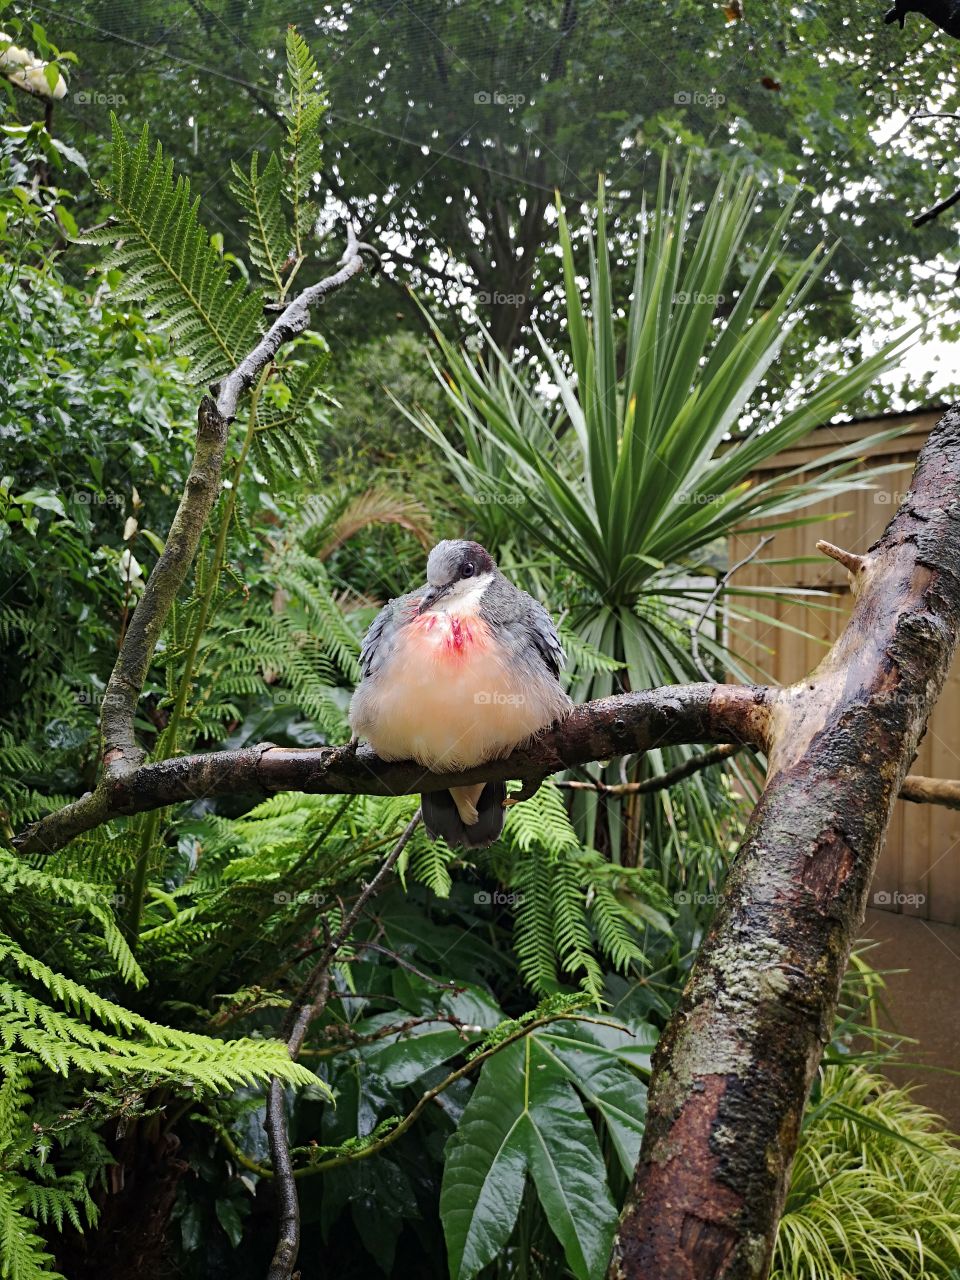 A bird at the zoo